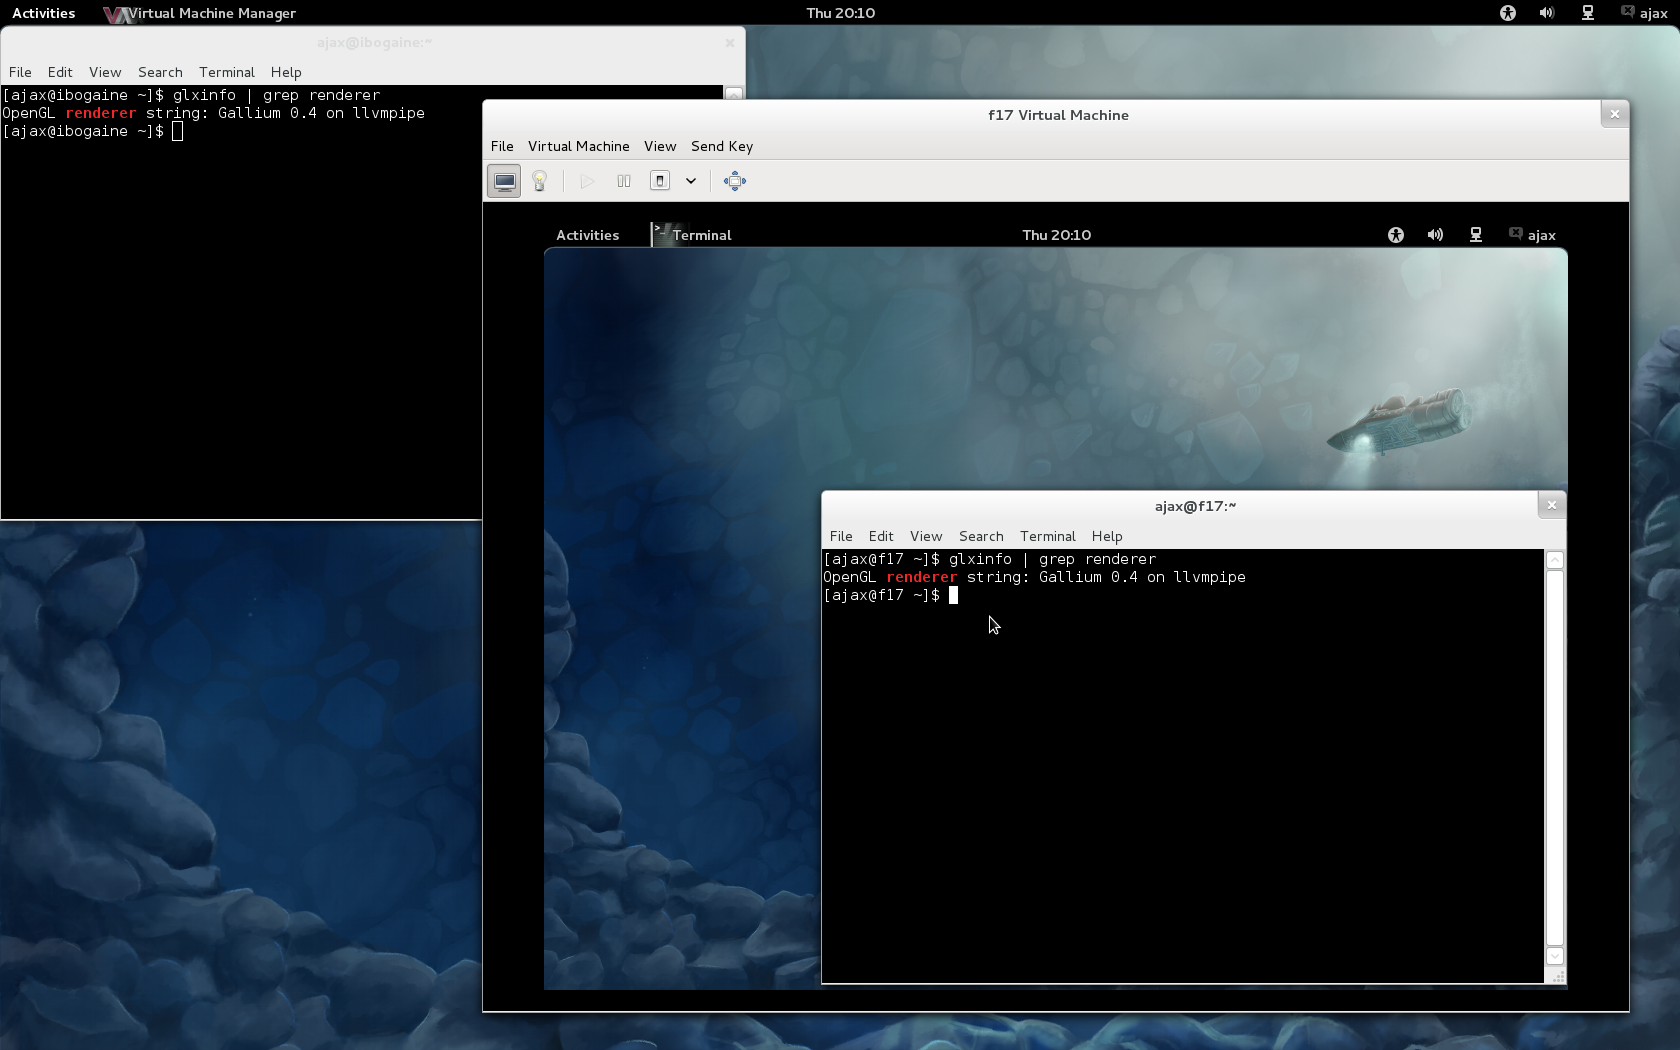 GNOME Shell running in a KVM